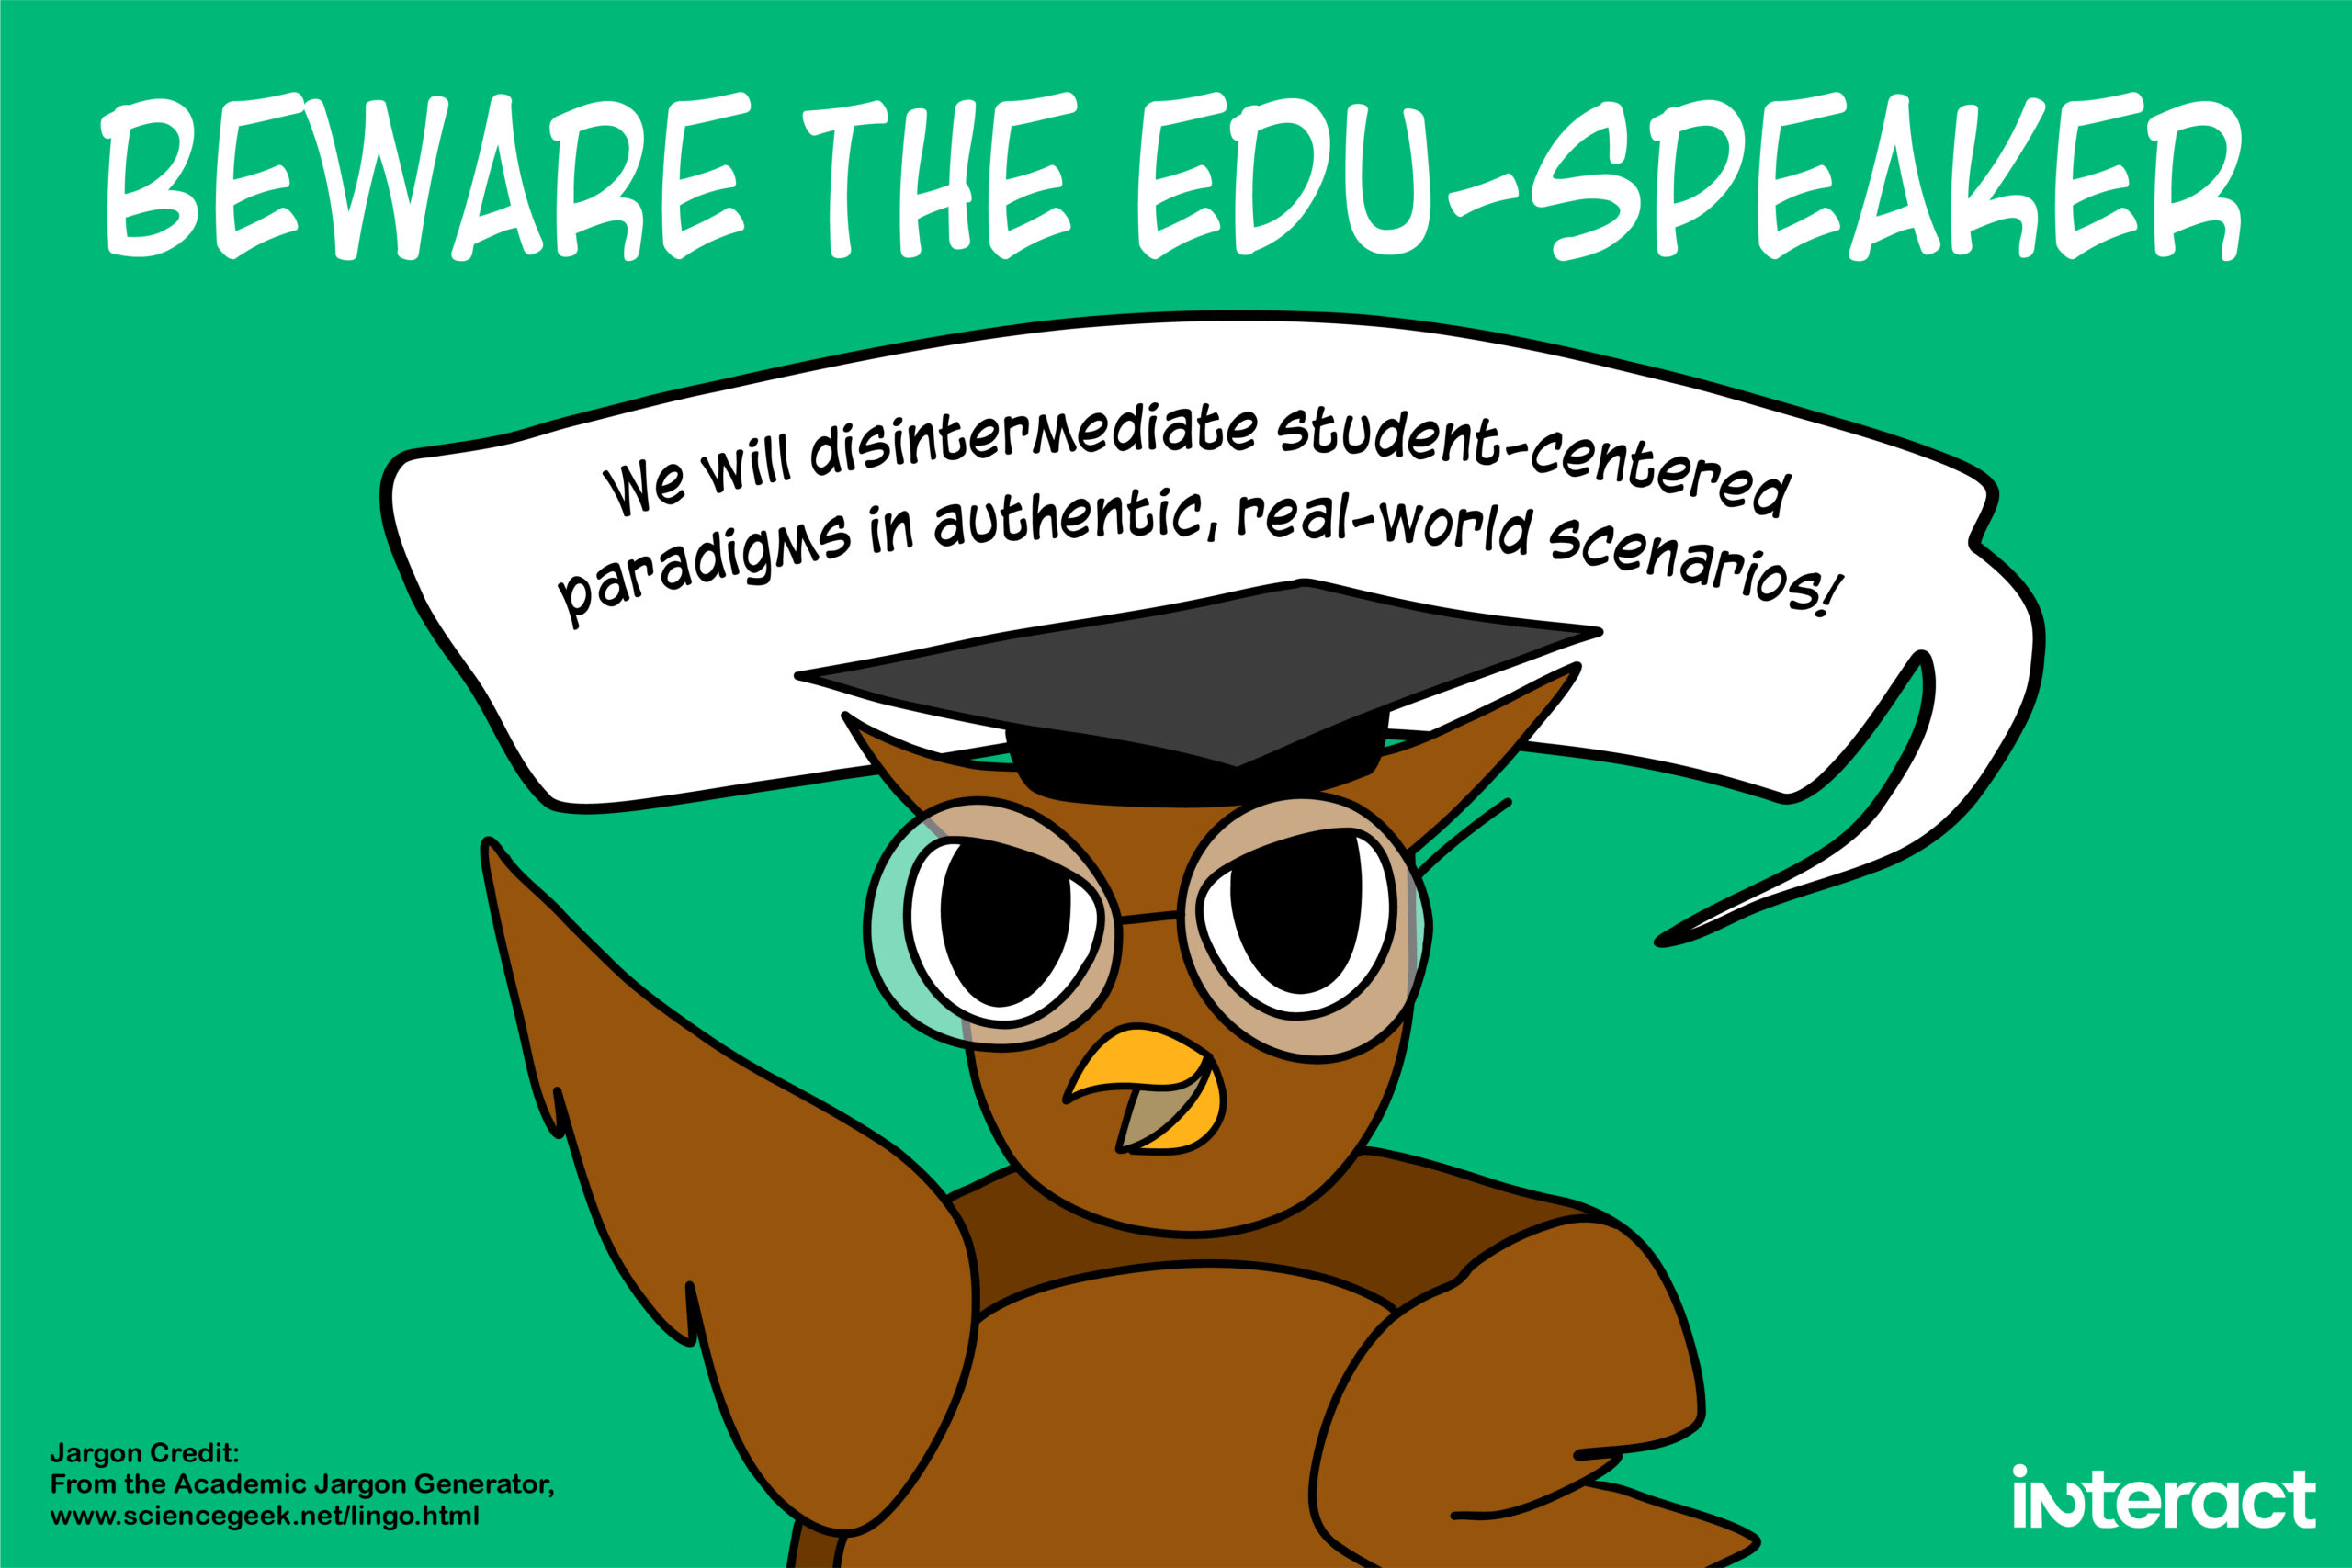 Illustration of a pretentious owl teacher with a speech bubble that says, “We will disintermediate student-centered paradigms in authentic, real-world scenarios!”